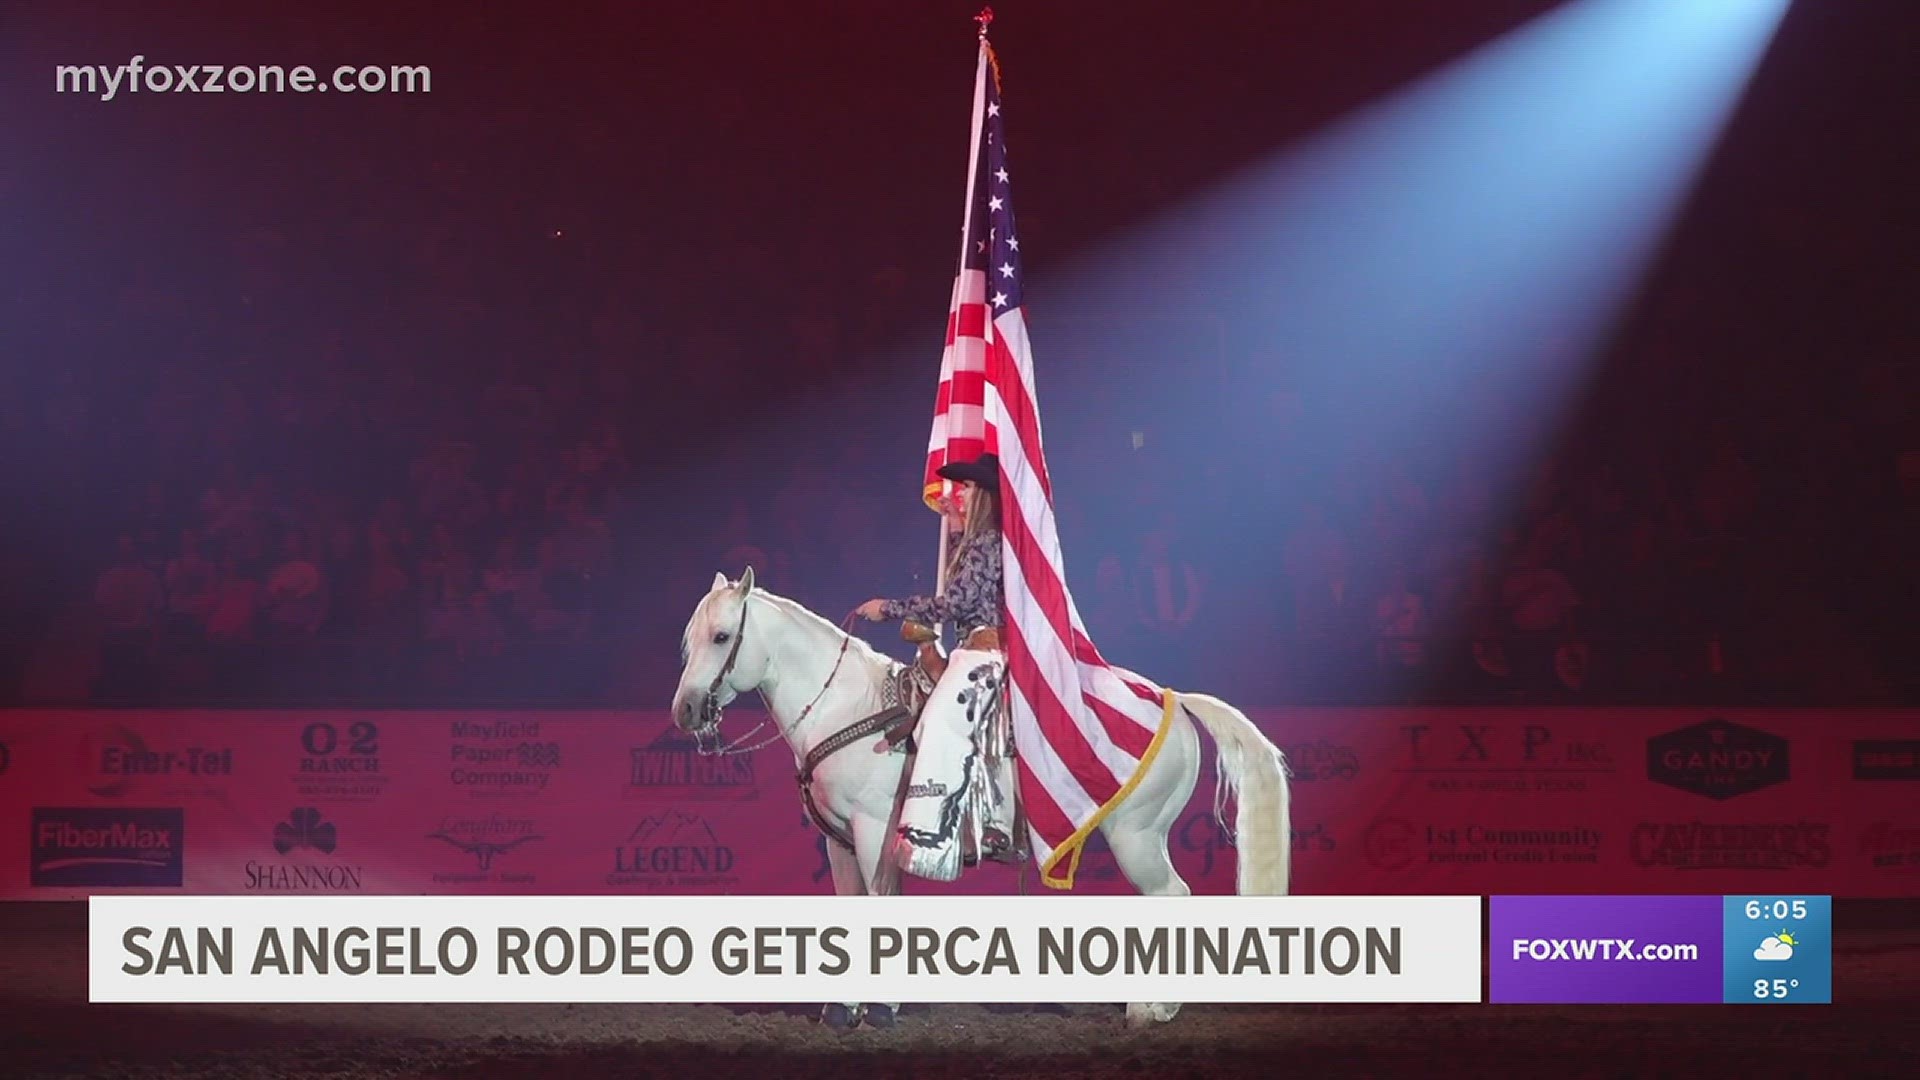 It's the third-straight year for the rodeo to receive the honor.